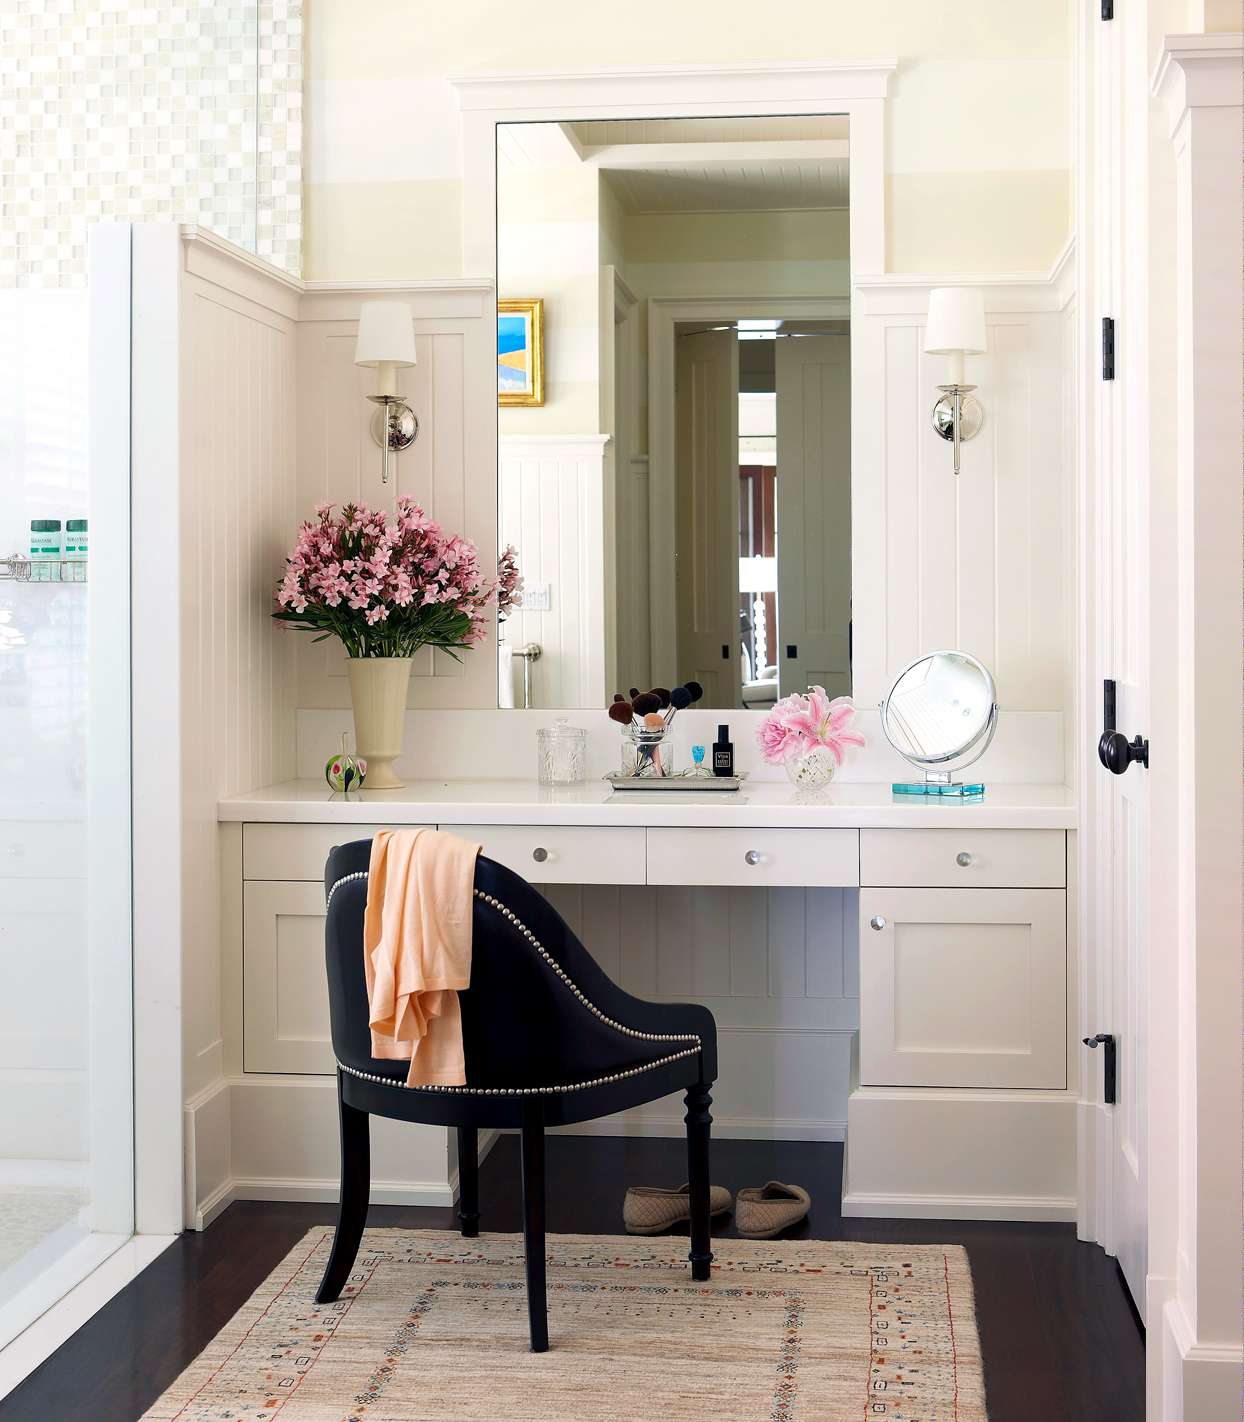 17 Bathroom Makeup Vanity Ideas to Help You Get Ready Each Morning ...